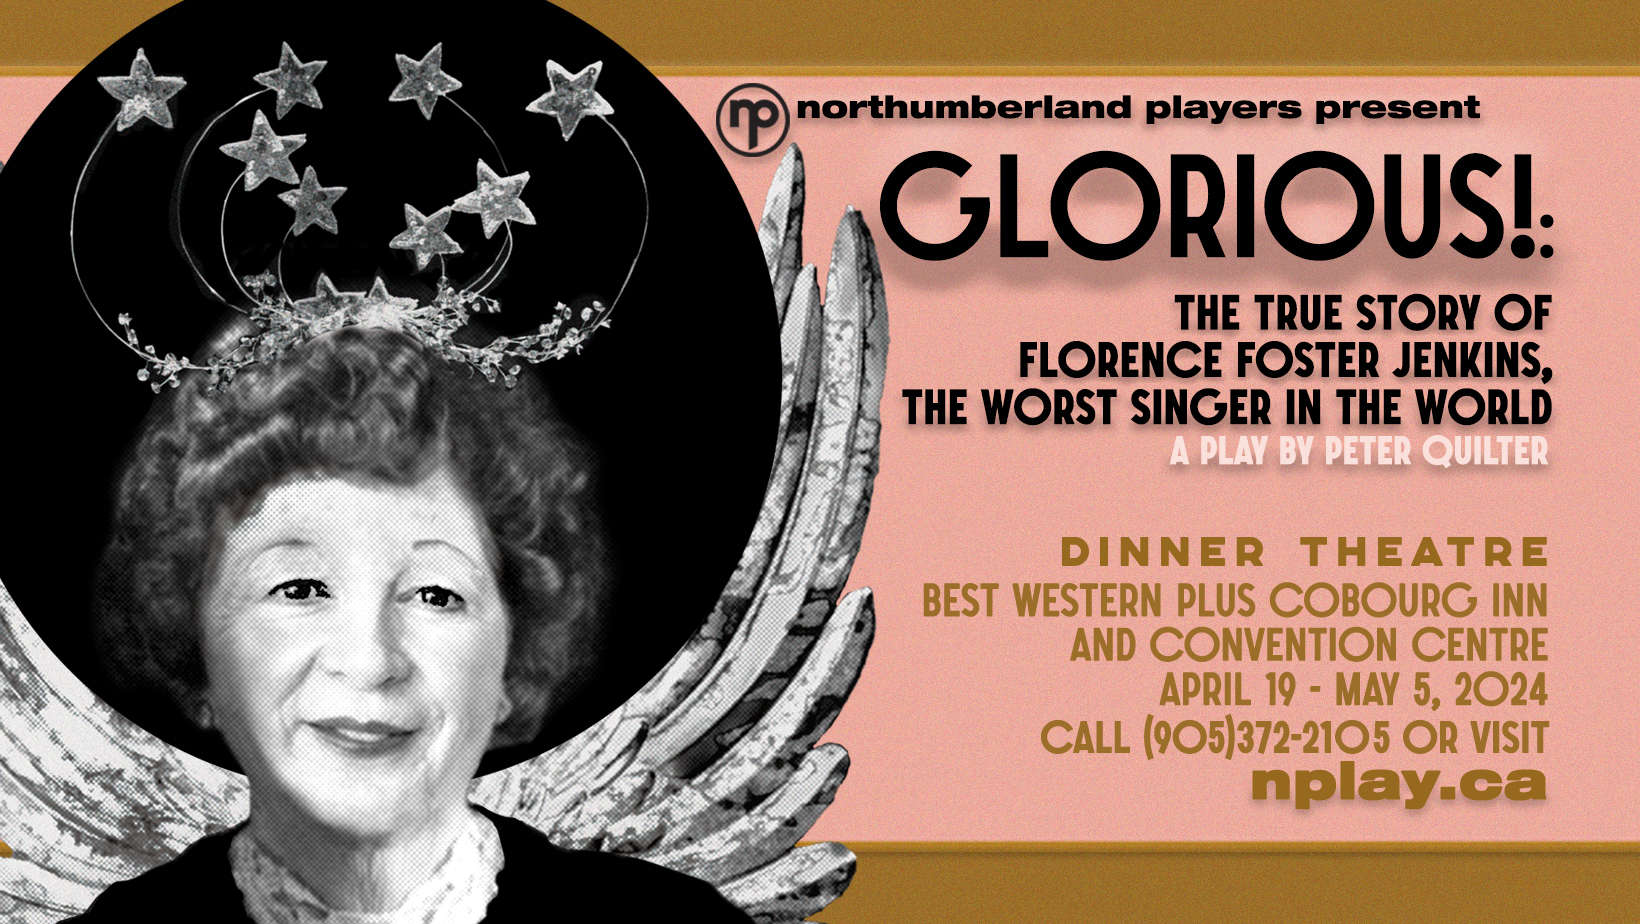 Poster for "Glorious! The True Story of Florence Foster Jenkins, the Worst Singer in the World"